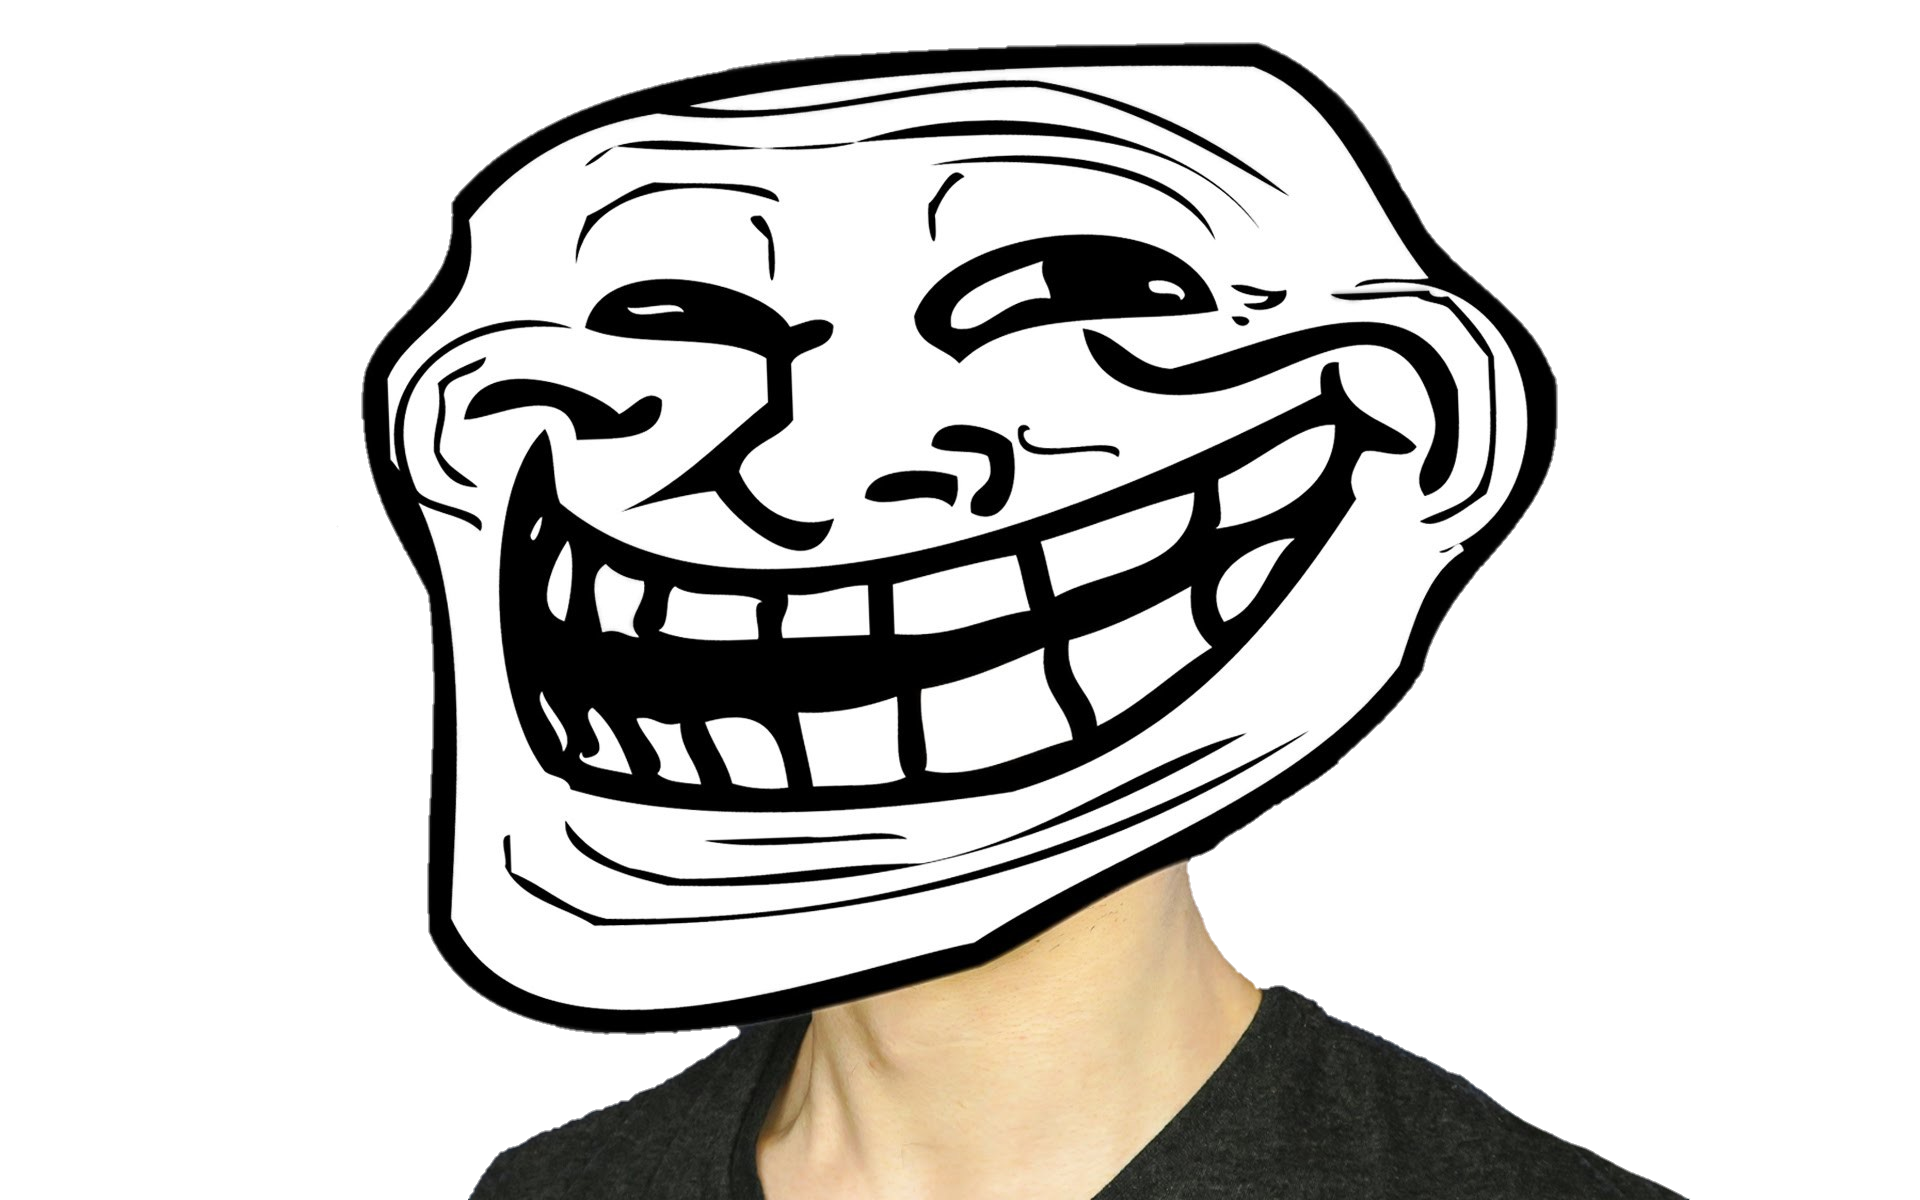 trollface-png-from-pngfre-10